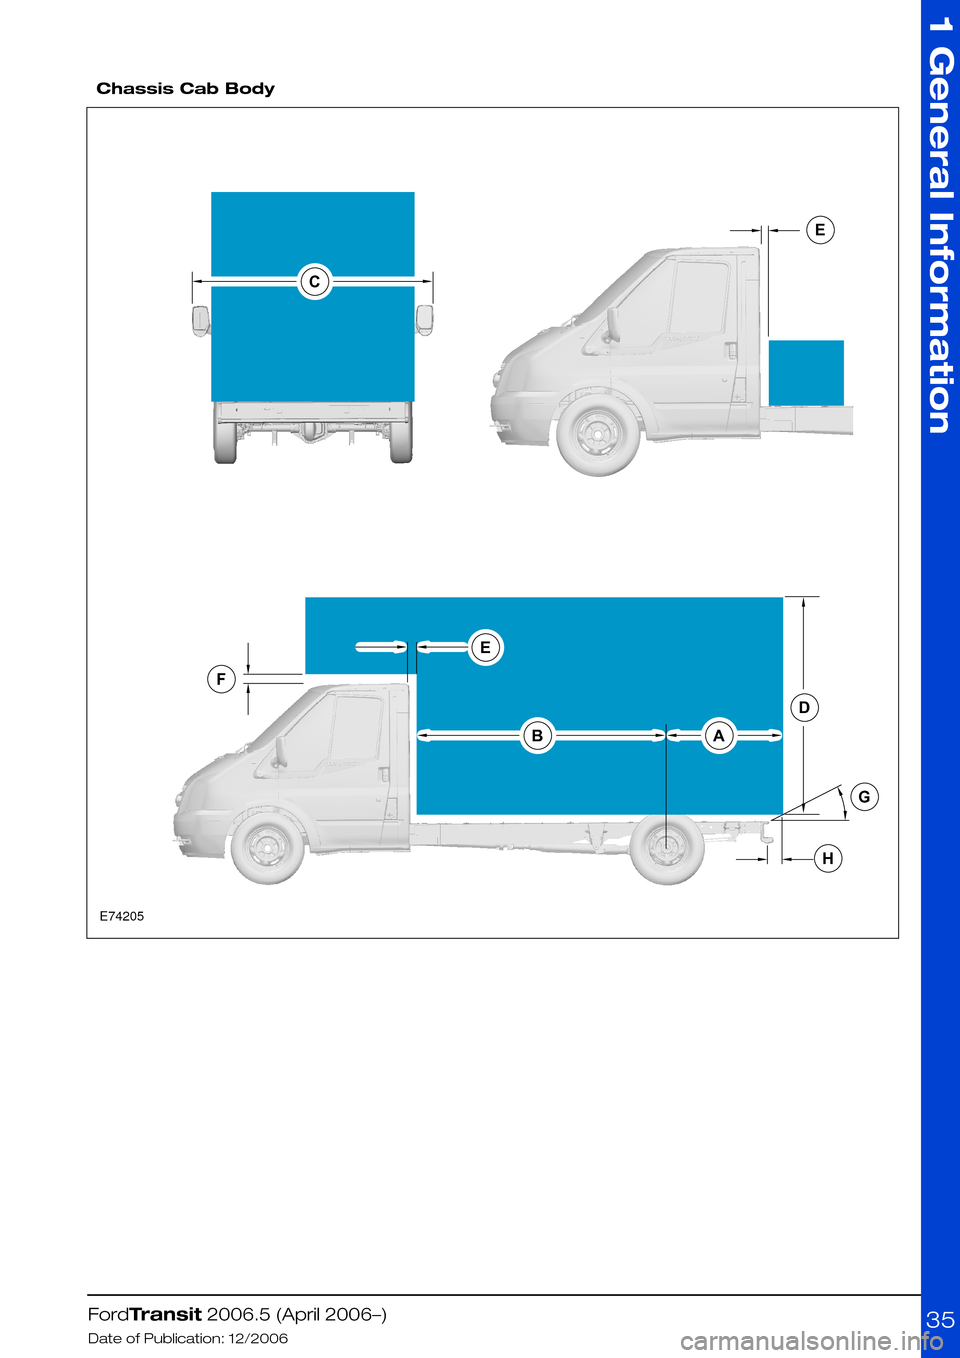 FORD TRANSIT 2006 7.G Body And Equipment Mounting Section Manual  
Chassis Cab Body
FordTransit 2006.5 (April 2006–)
Date of Publication: 12/2006
1 General Information
35CEEFBADGHE74205  